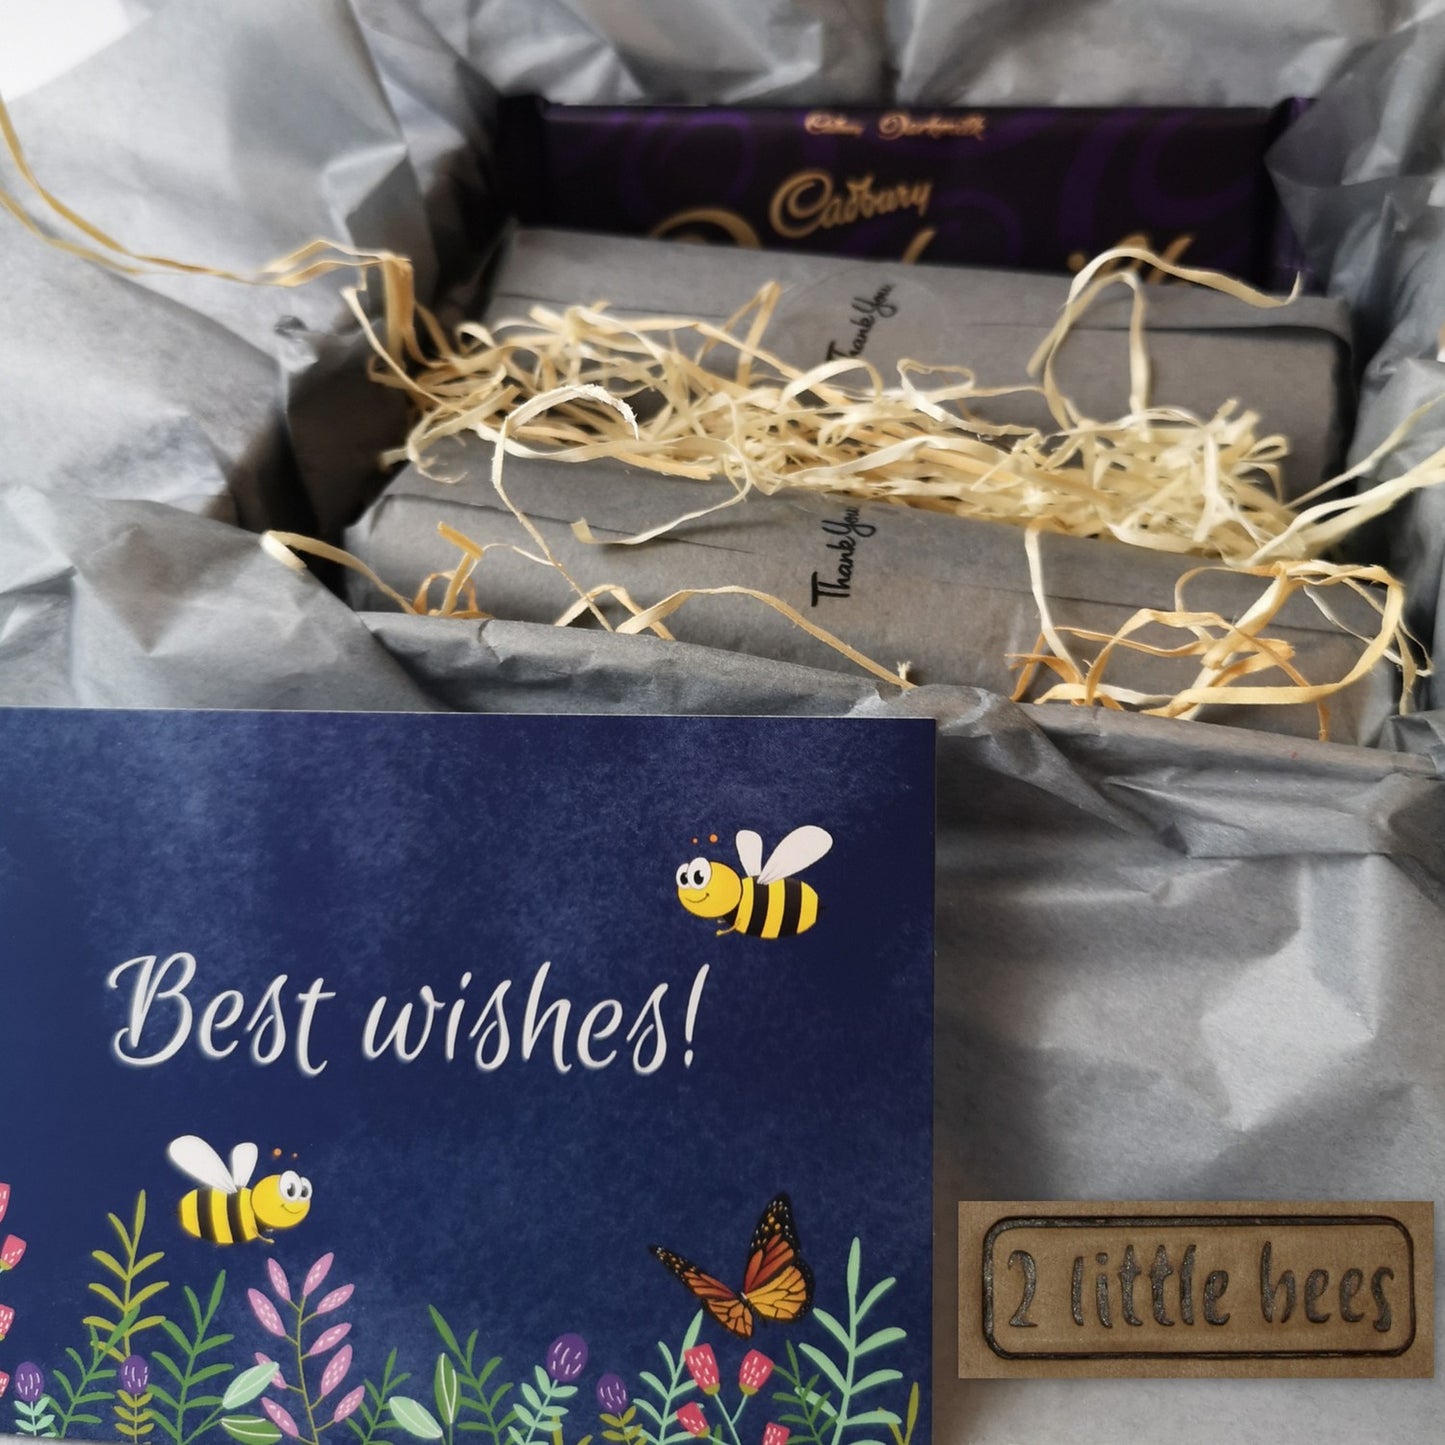 Gift set. 2 x Beeswax candles. Stone holders. Chocolate. Gift box. - 2 little bees